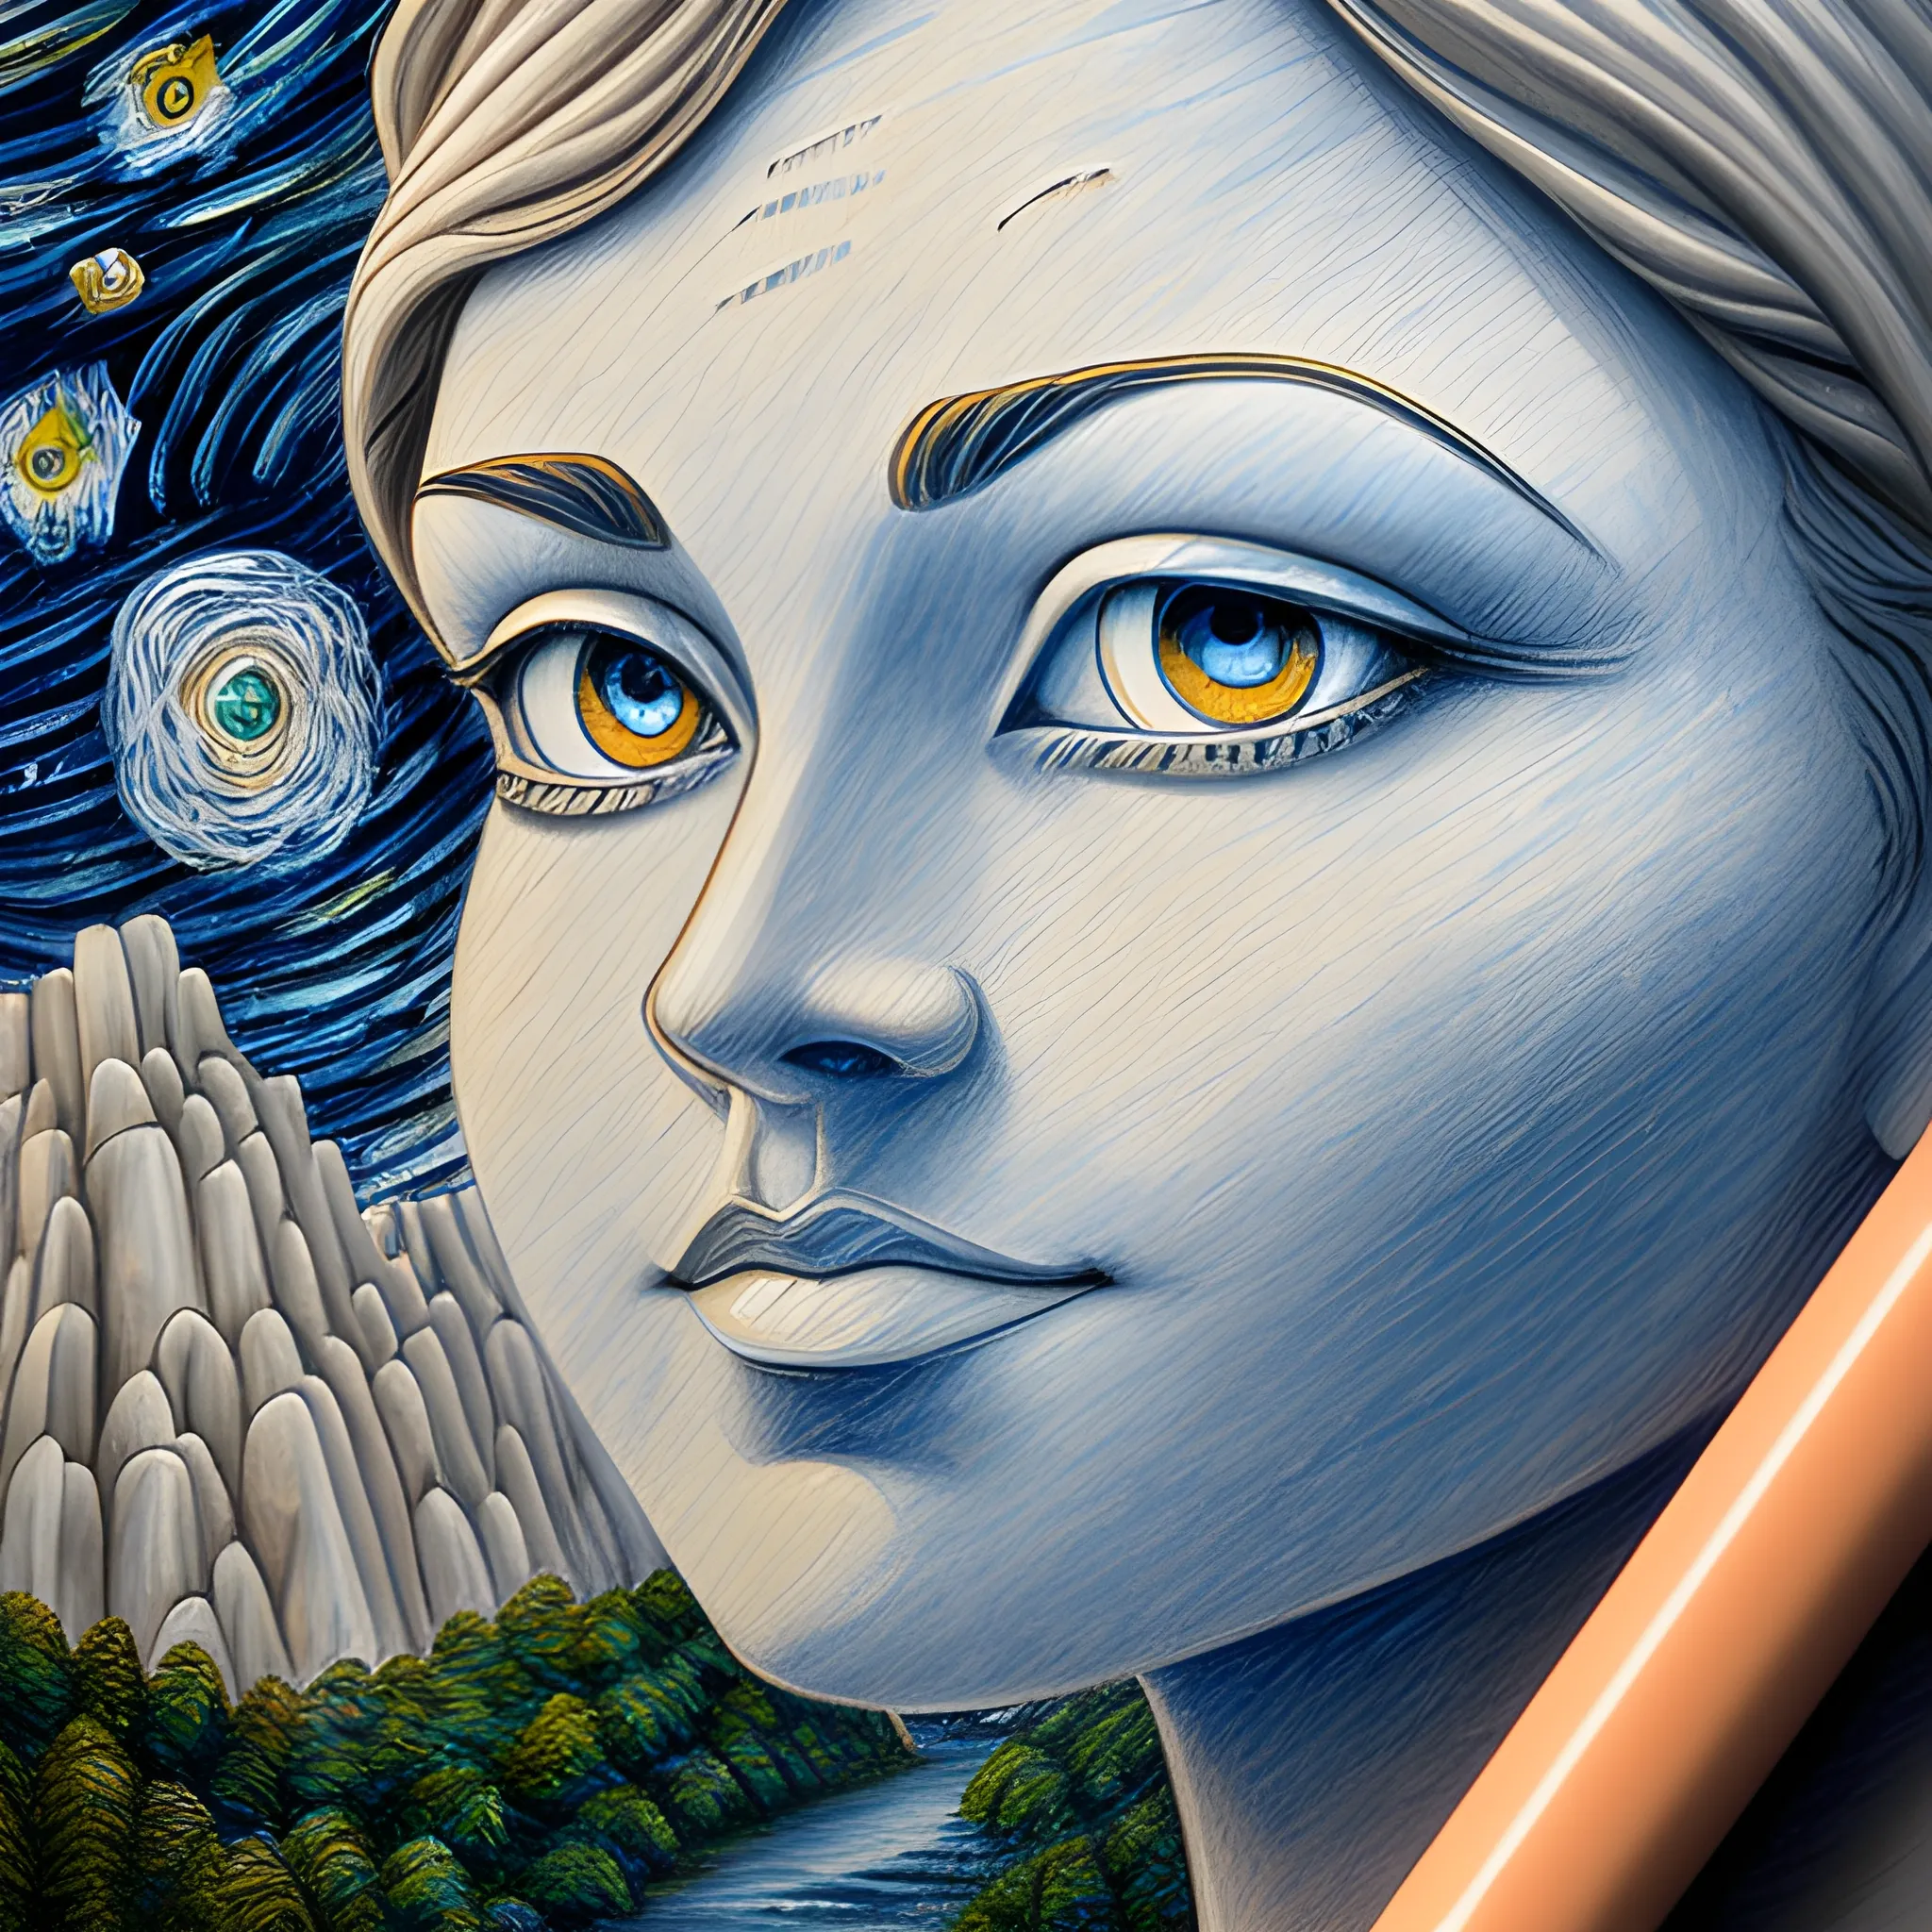 face sculpted in an immense mountain of limestone rock and waterfalls gushing from these 2 eyes towards a lake in the foreground, a starry night sky with spinning stars in the background, Cartoon, Pencil Sketch, Oil Painting